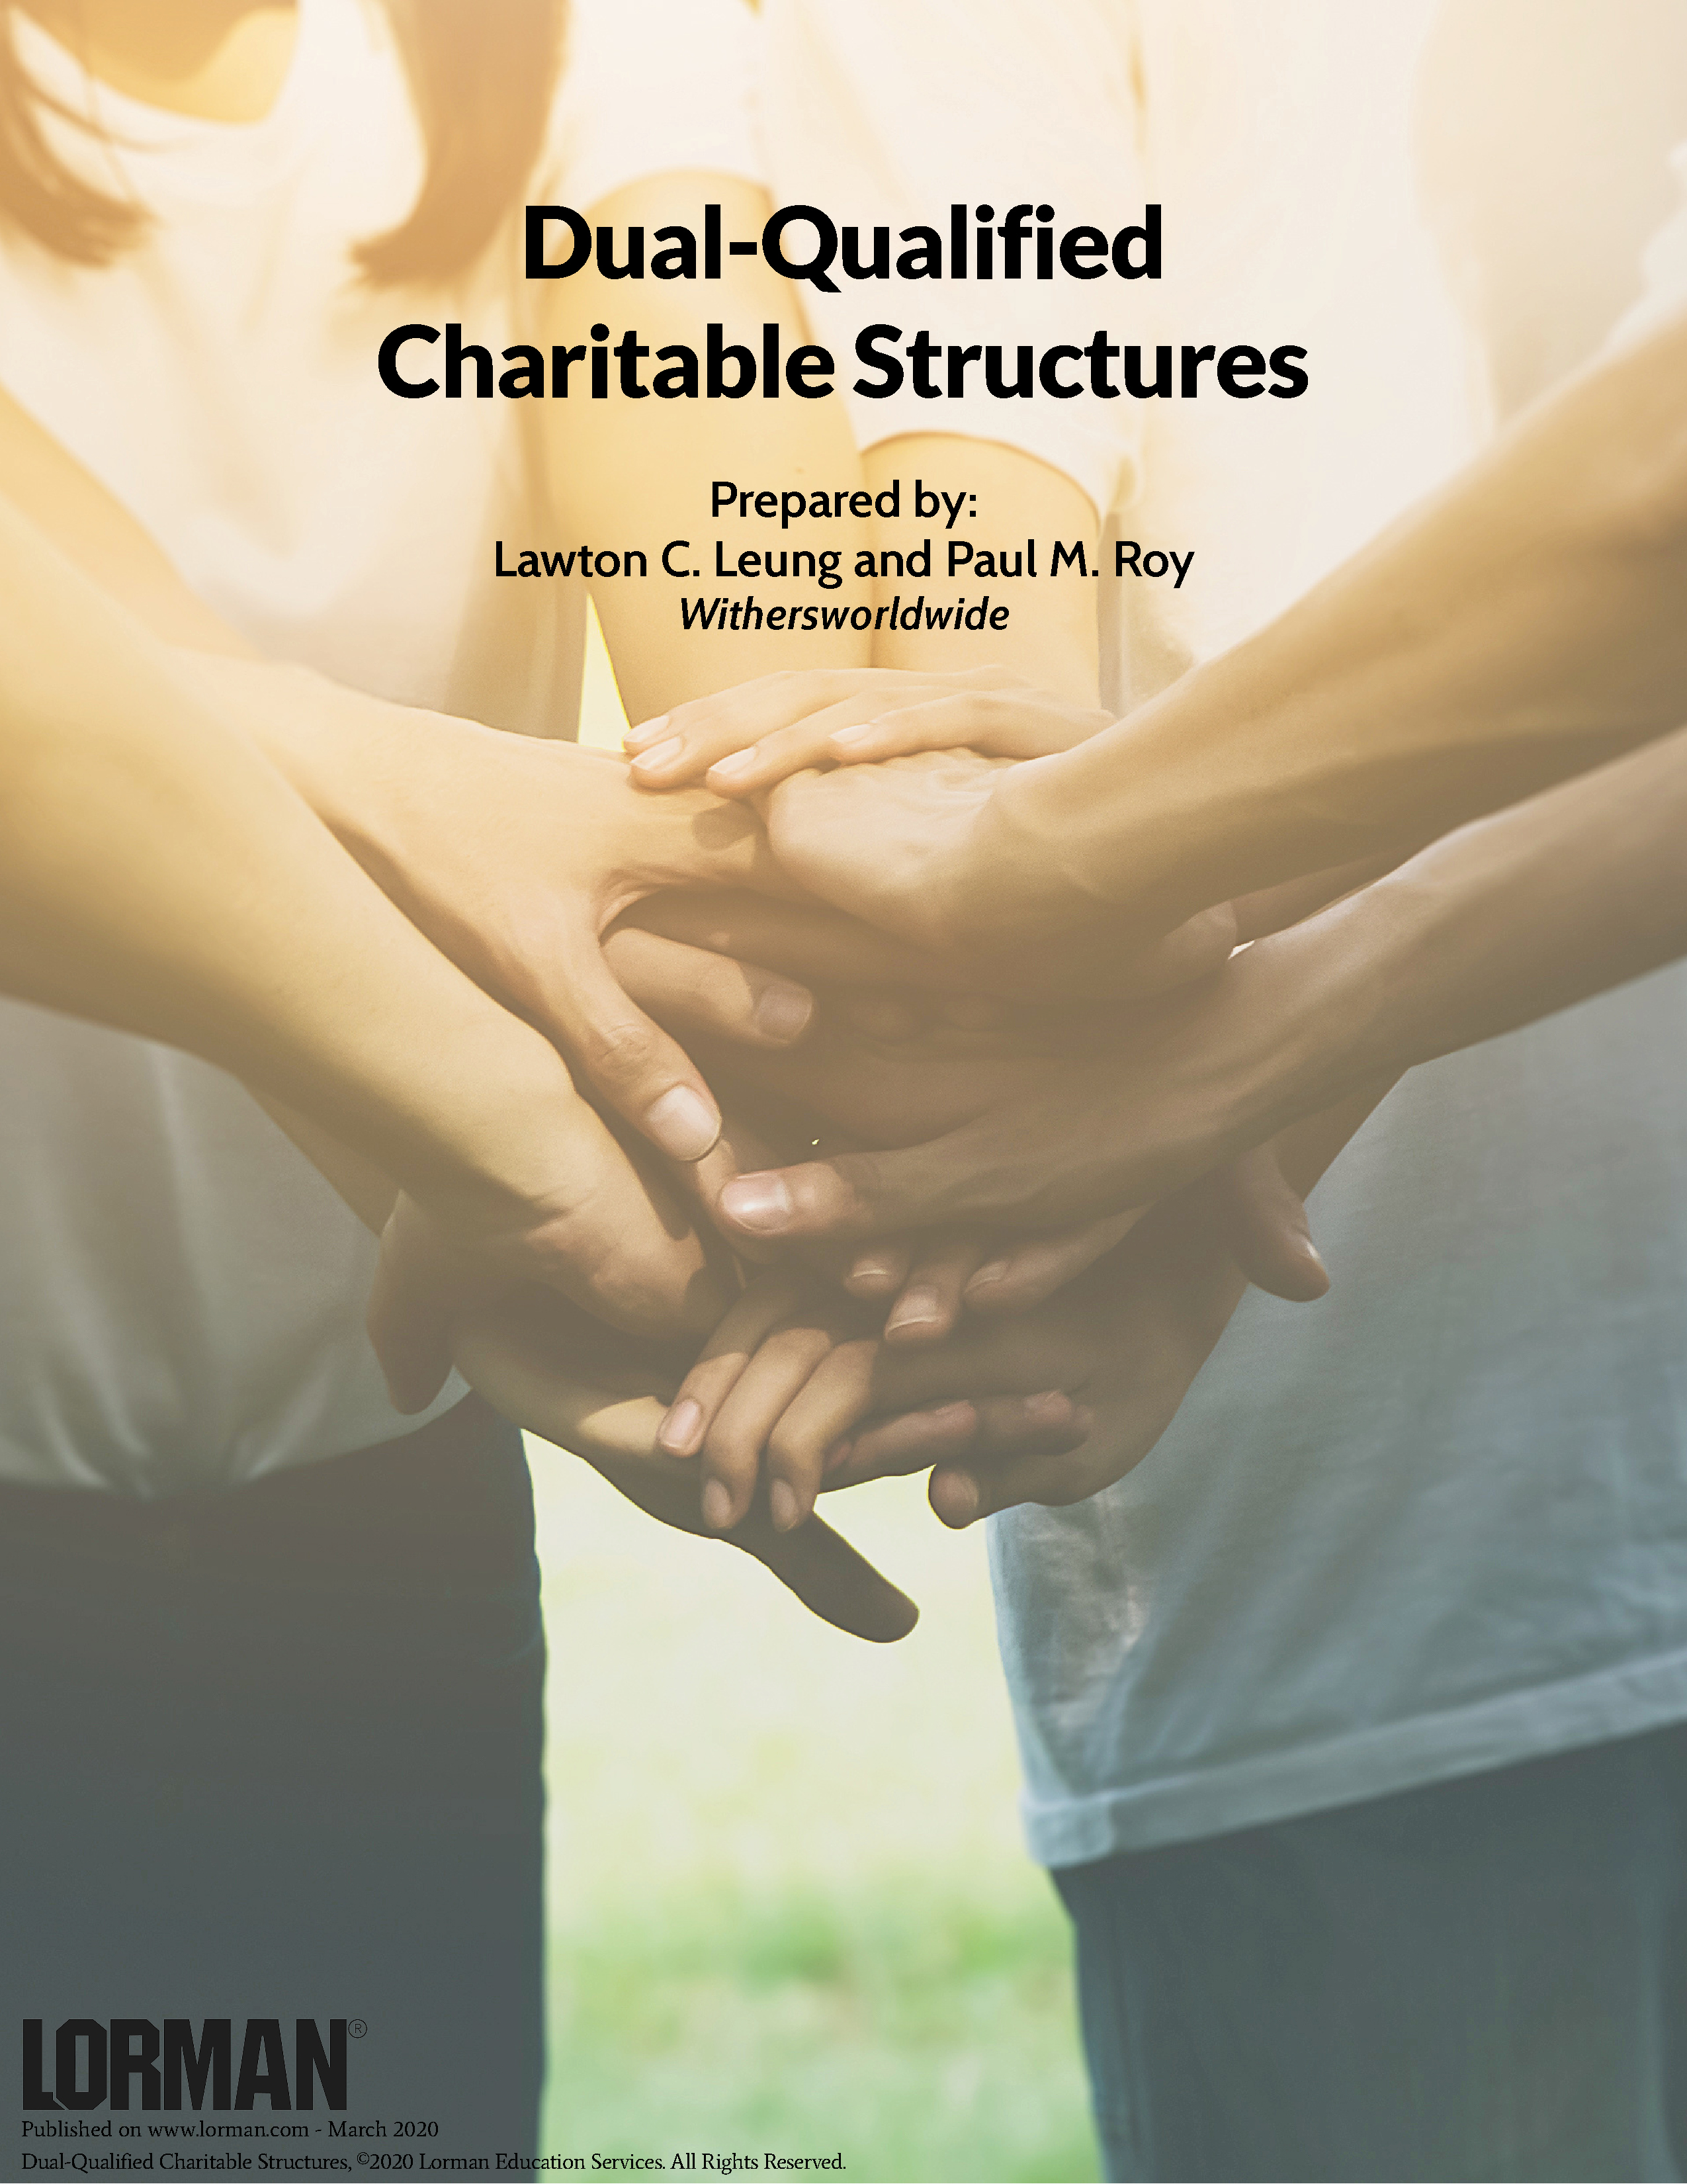 Dual-Qualified Charitable Structures